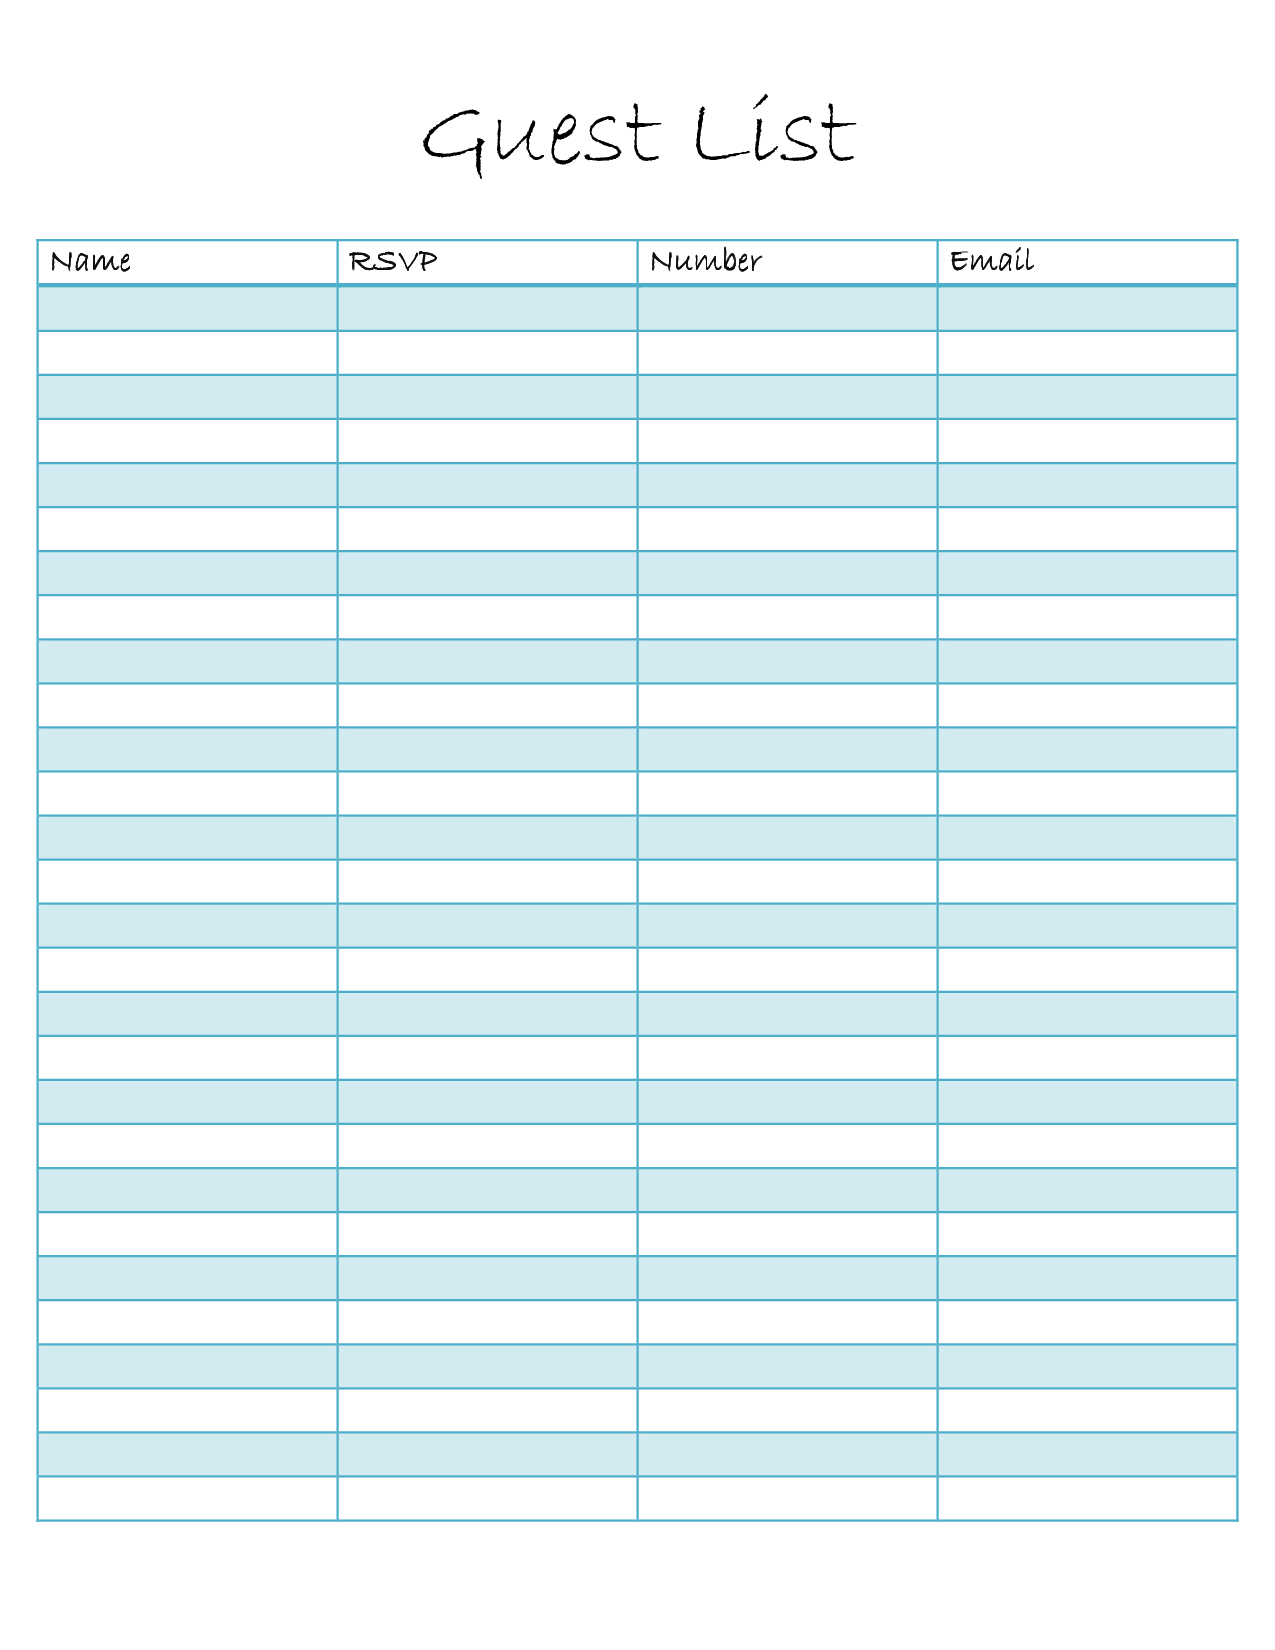 Wedding Guest List Spreadsheet Template Free Excel Microsoft Throughout Blank Checklist Template Word